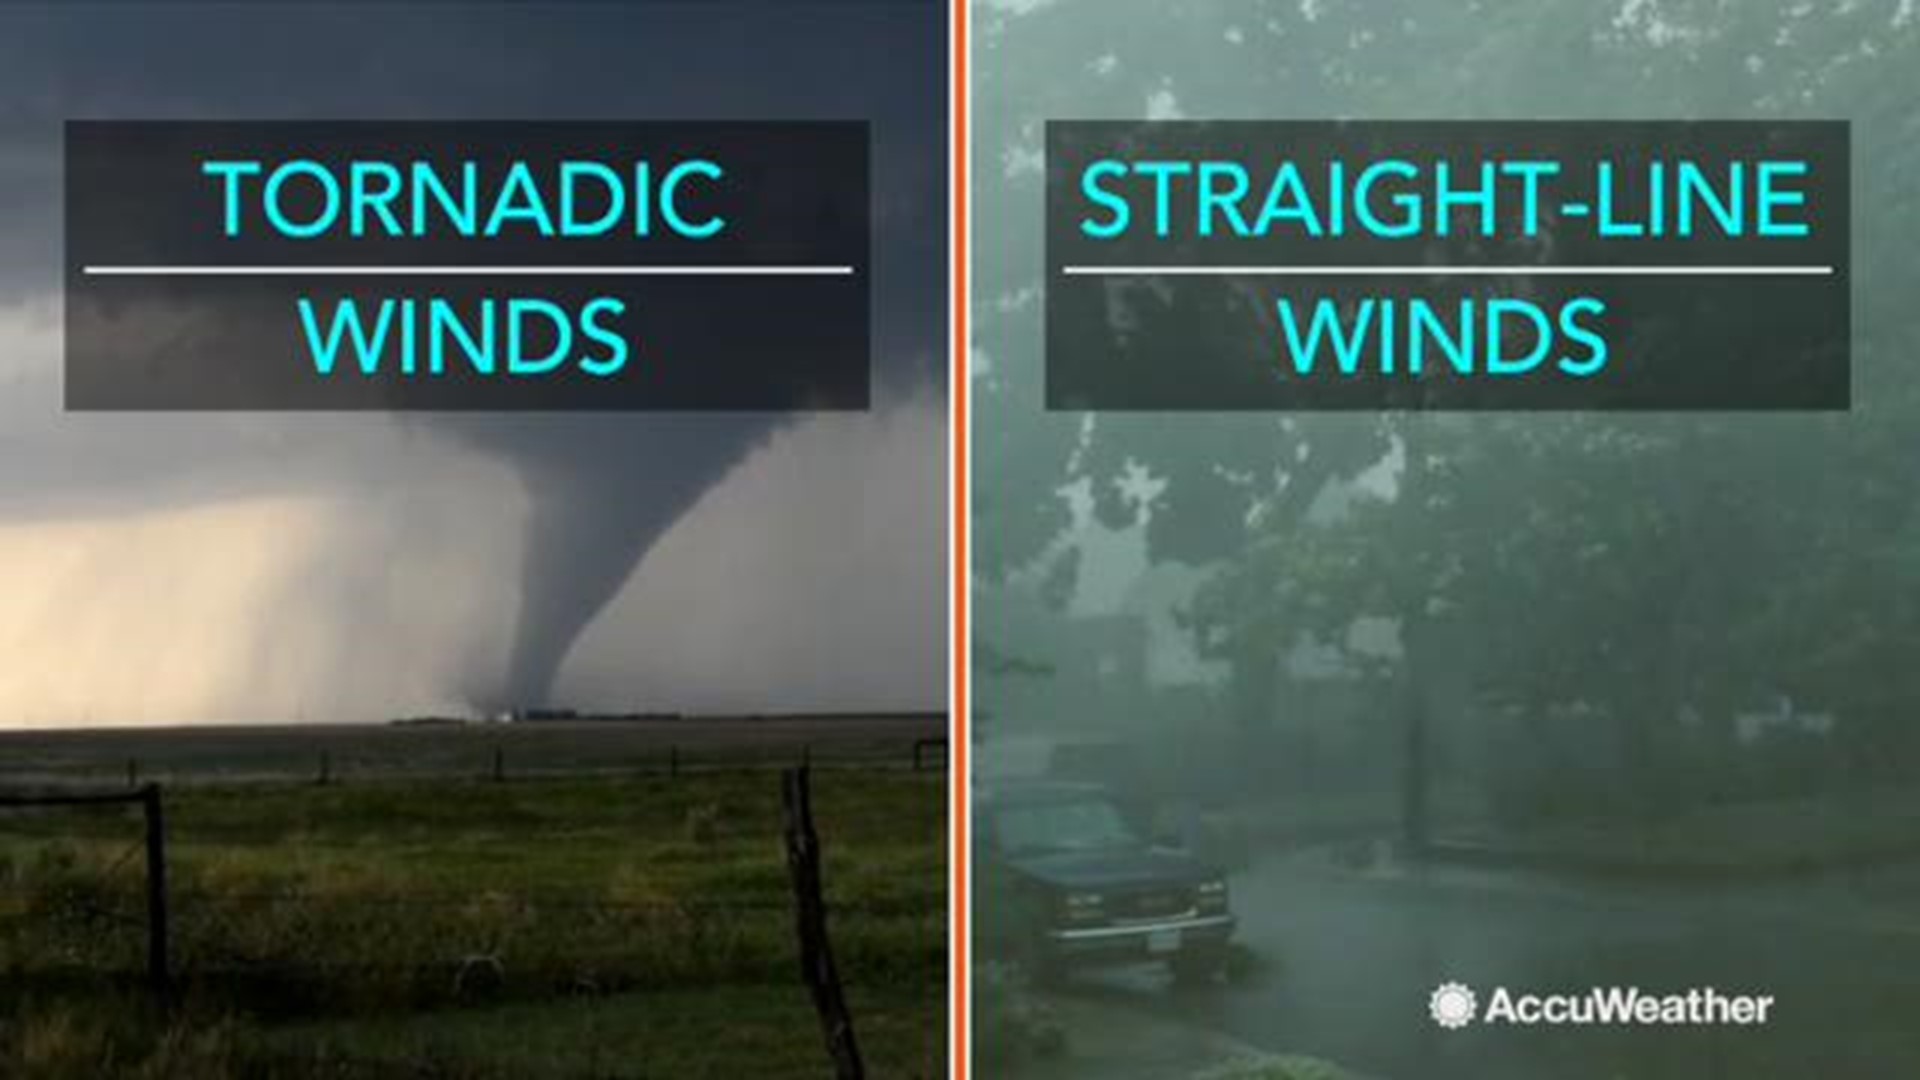 One of the most deadly part of any storm are damaging winds.  The damage inflicted depends on the type of winds involved.  AccuWeather meteorologist Mark Mancuso goes over two types: tornadic and straight-line winds.